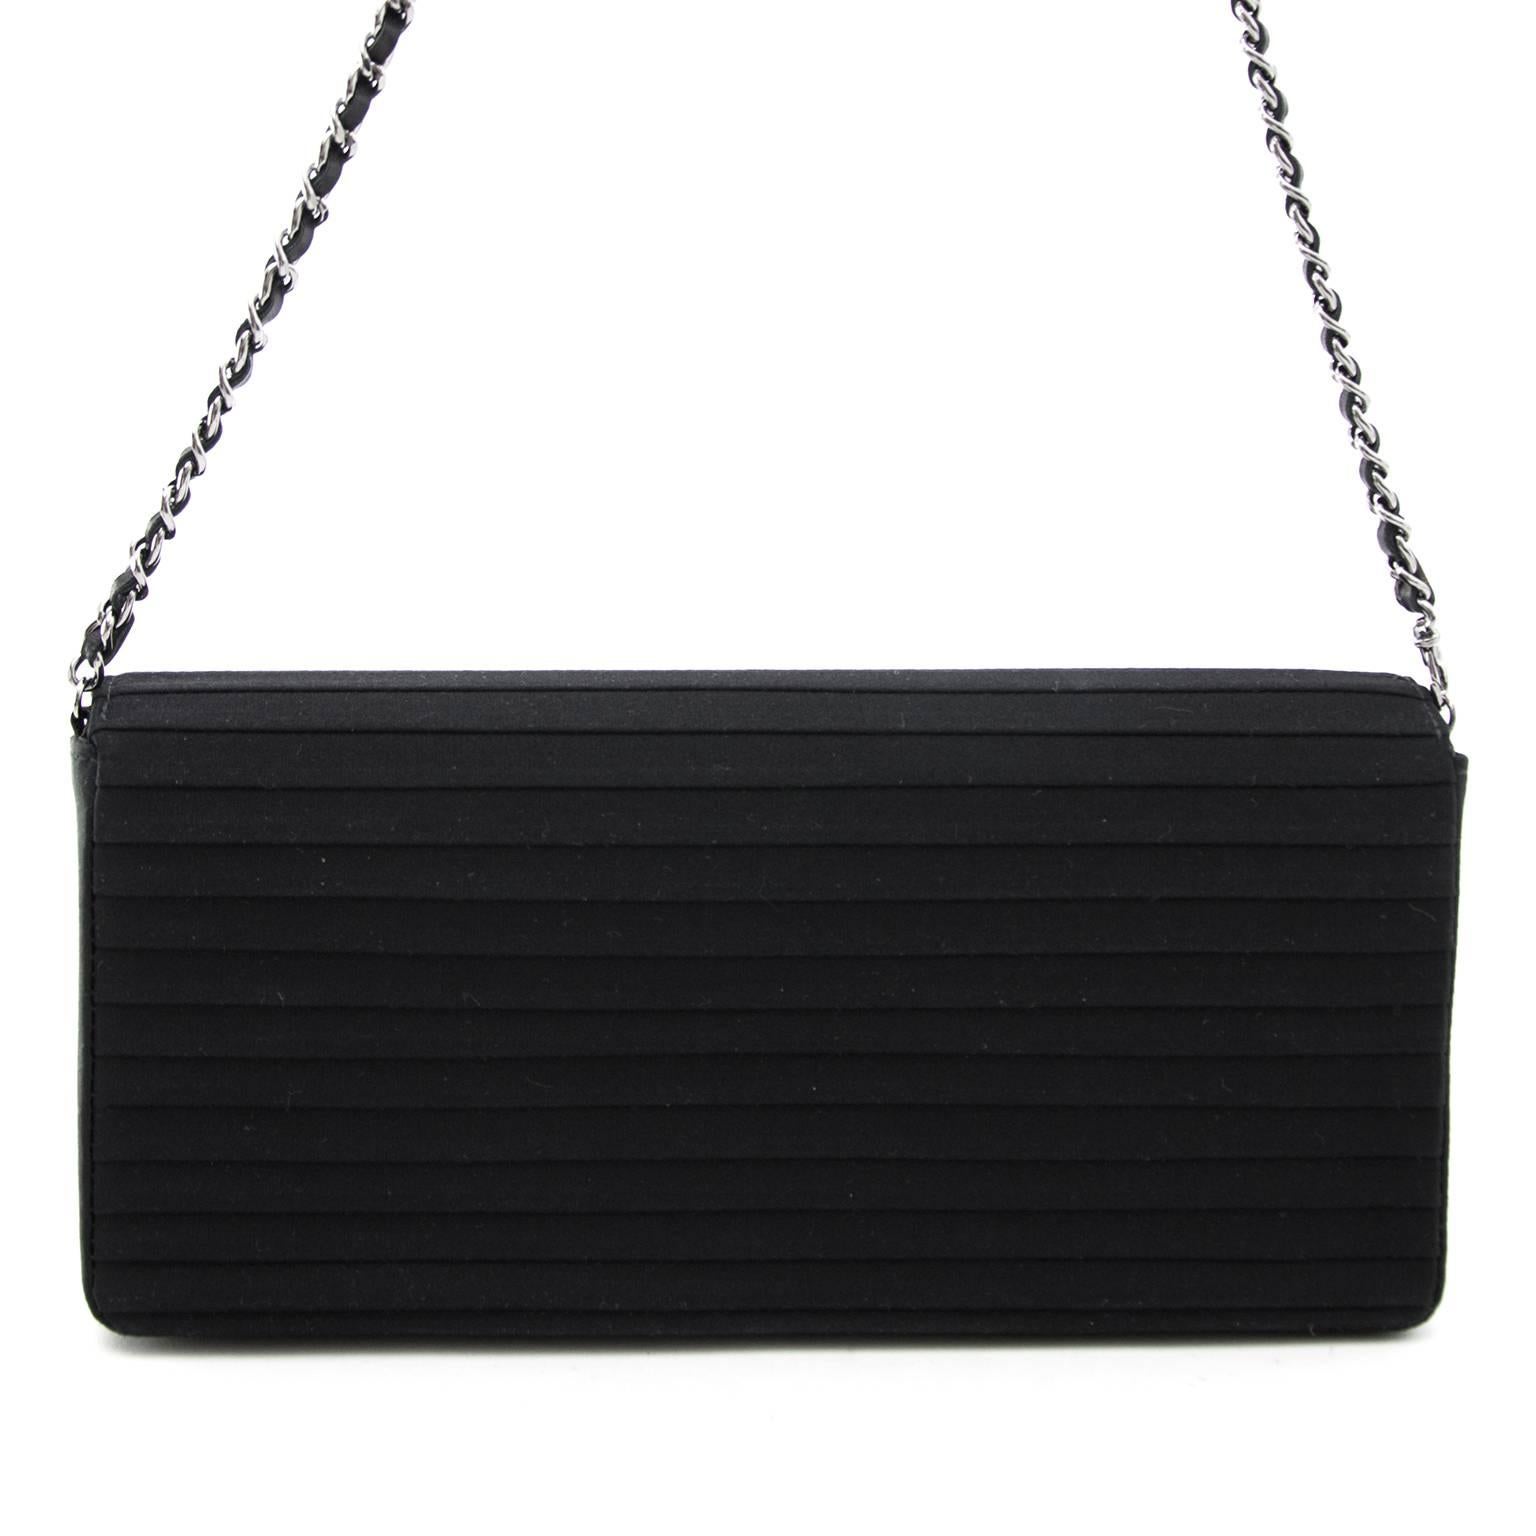 The ultimate night bag, this Chanel Black Clutch Bag Striped Fabric. The strap makes it possible to wear the bag on your shoulder or you can wear it as a clutch. The bag has enough space for your phone, makeup bag, wallet. The ultimate item to